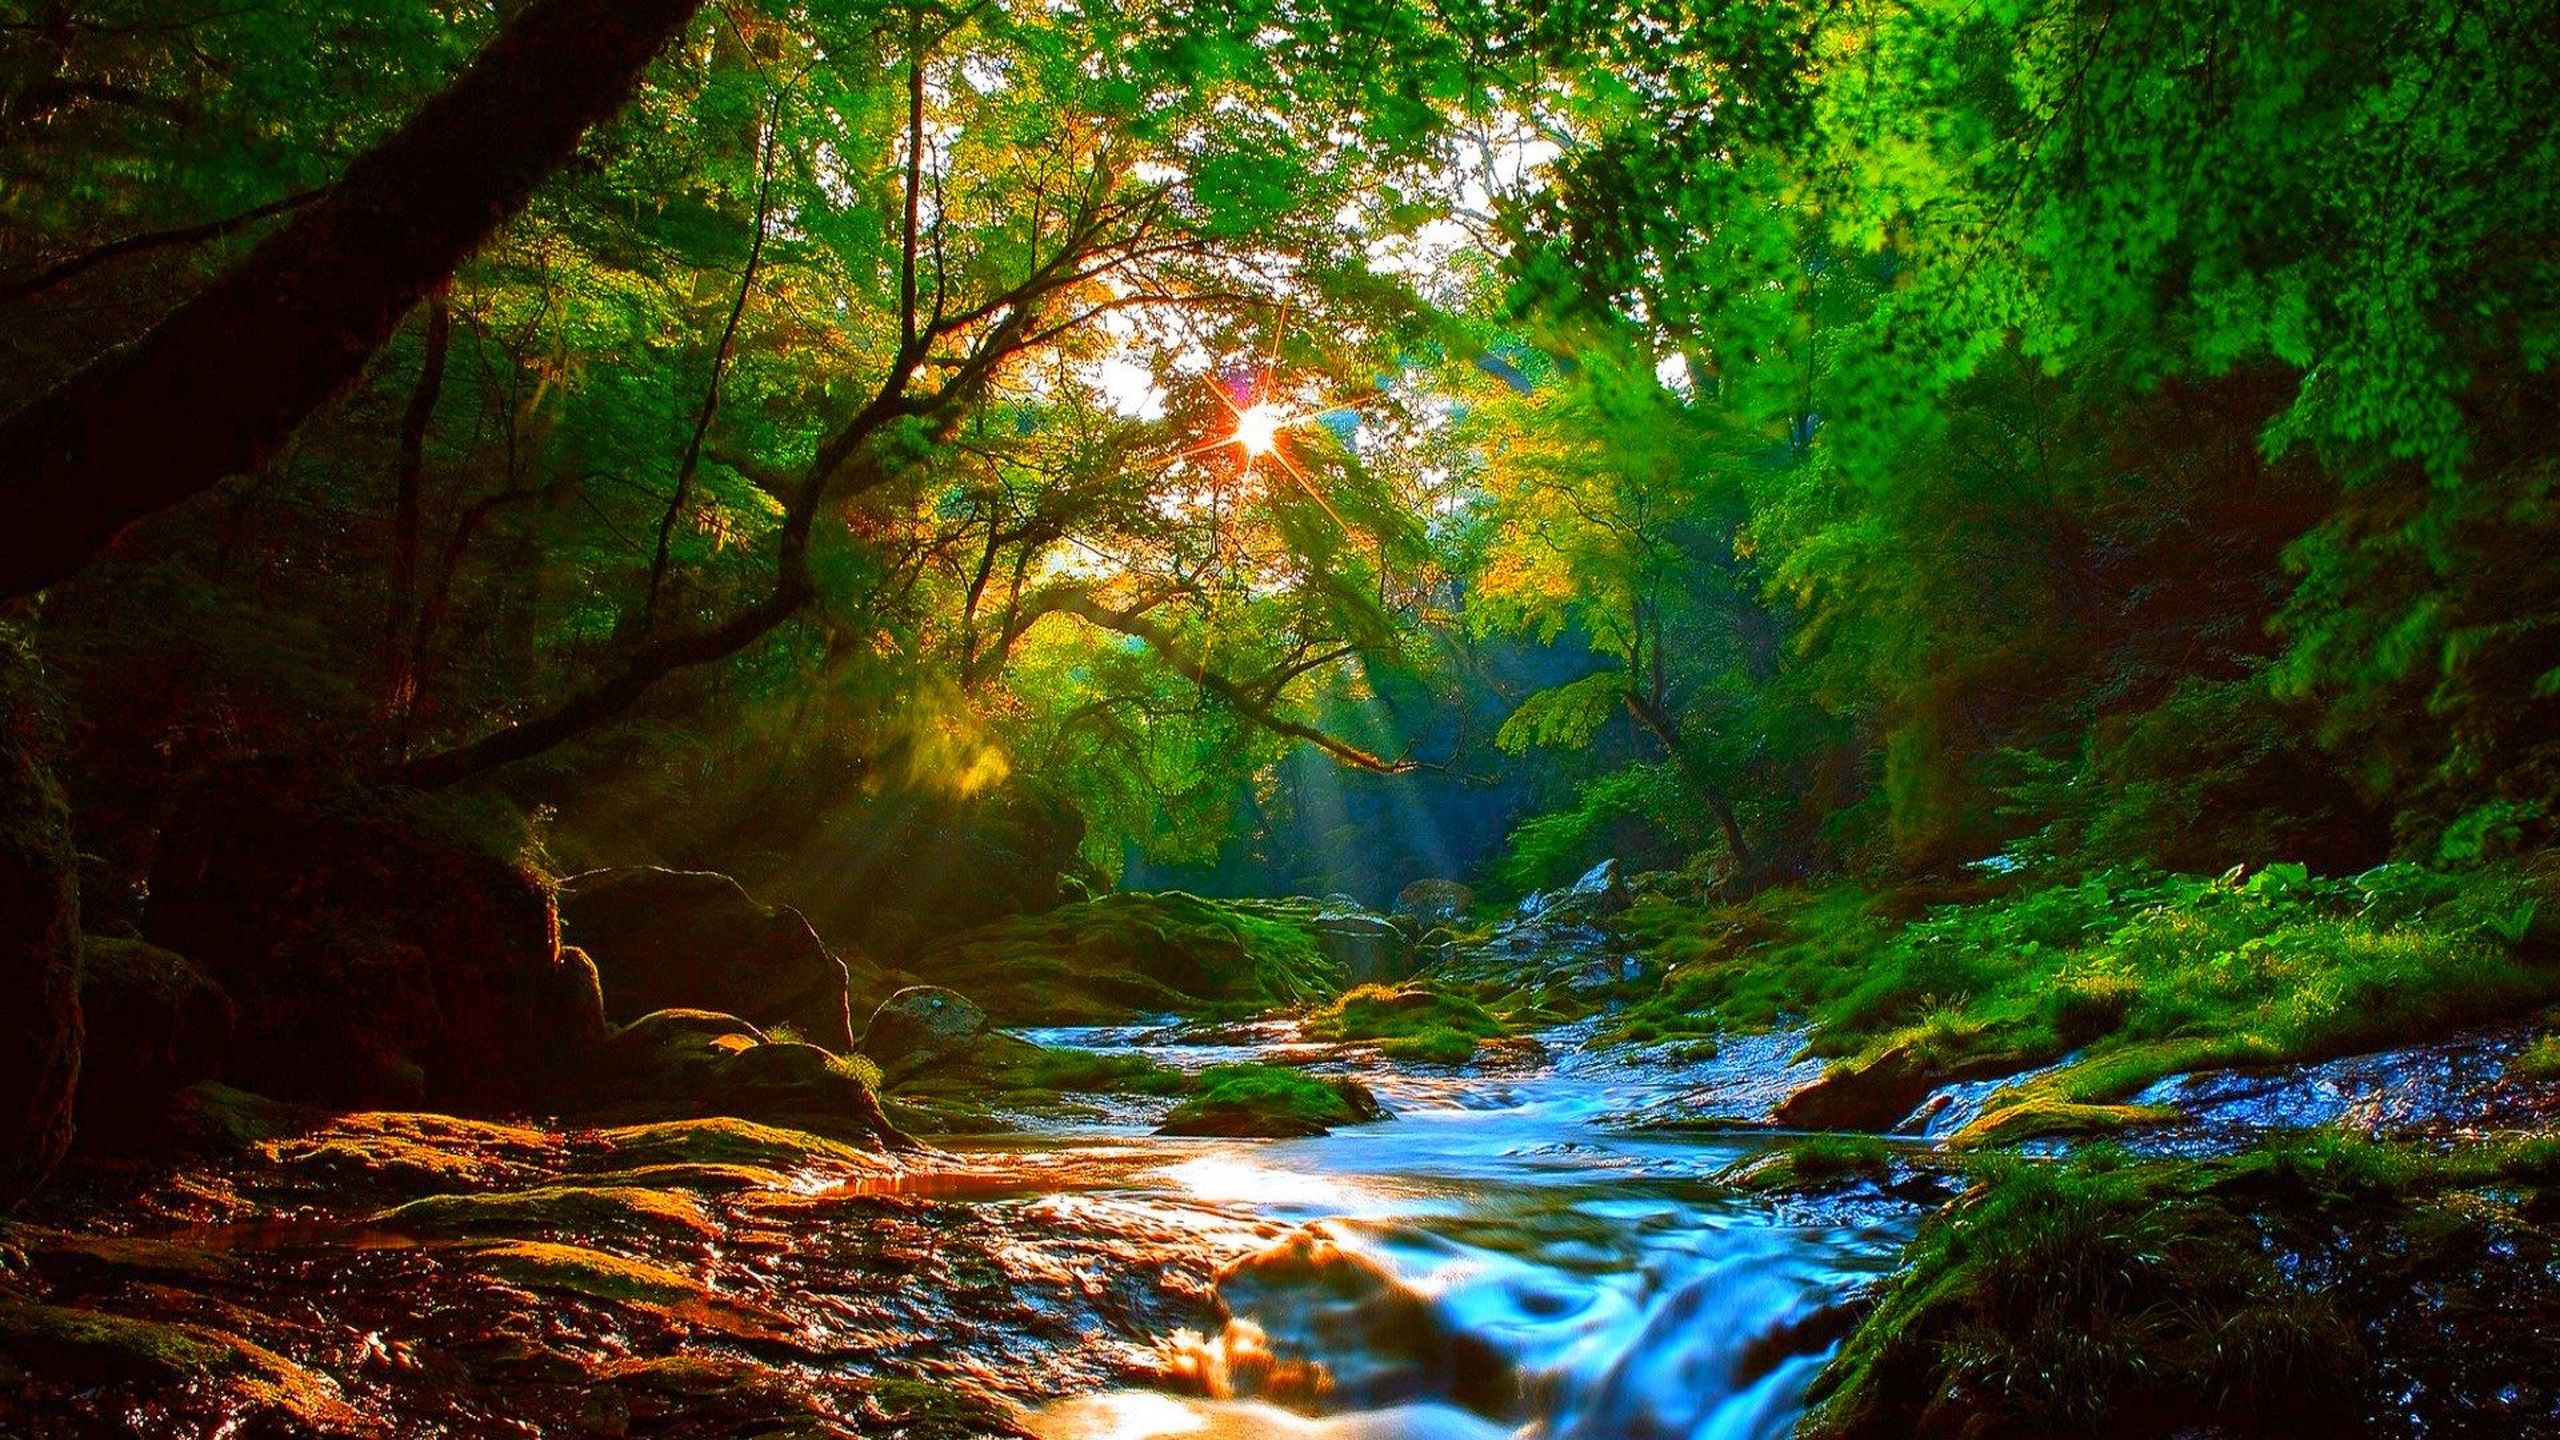 Sunrise Beautiful Mountainous River Forest With Green Trees, Rocks